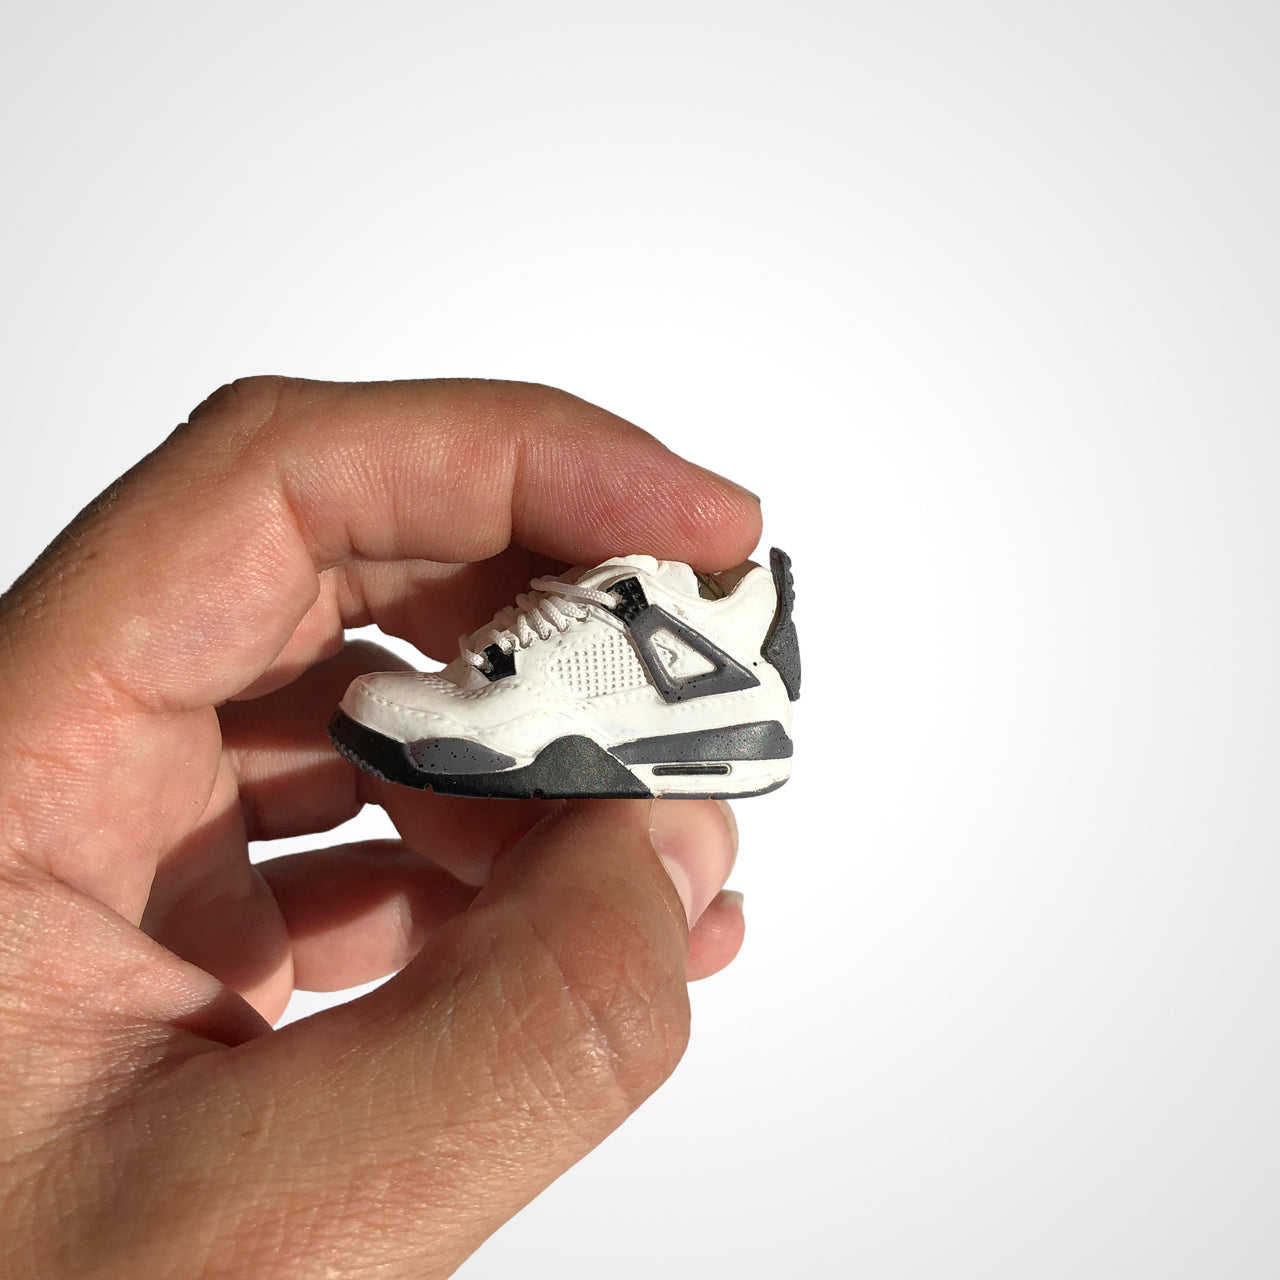 AJ 4 "White Cement" - Sneakers 3D Keychain